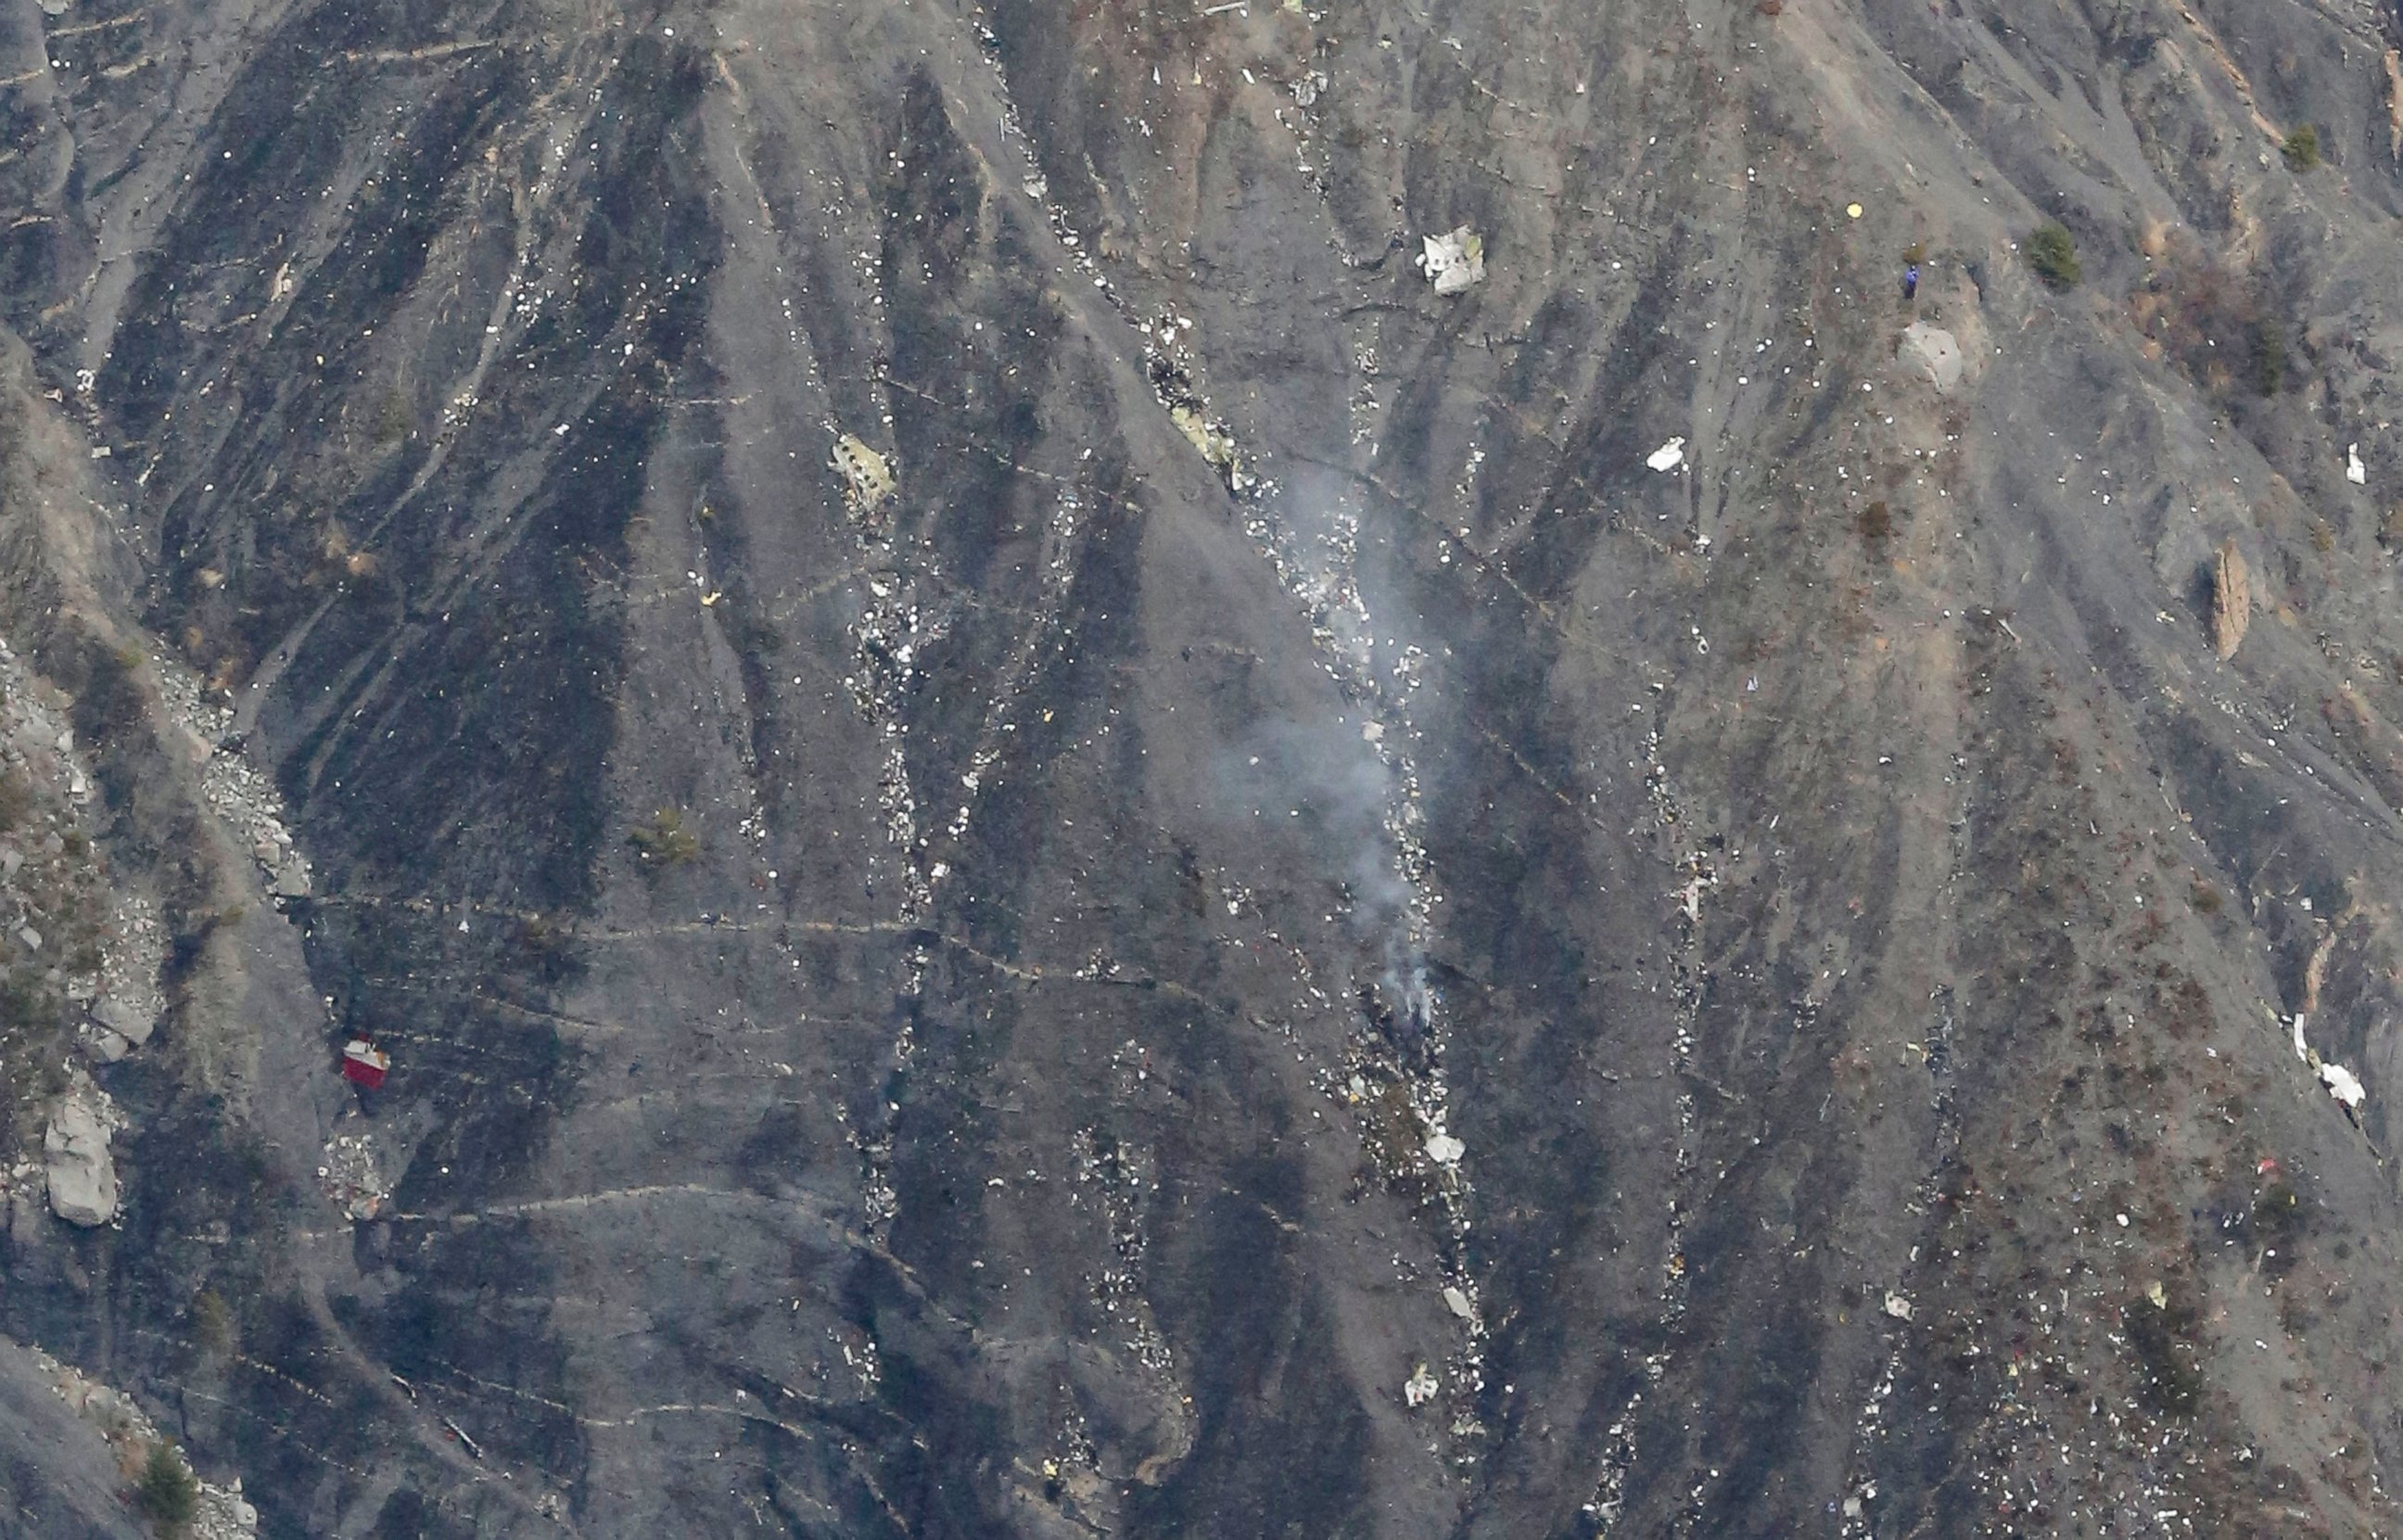 PHOTO: This aerial photo show what appears to be wreckage from the Airbus A320 plane crash near the town of Digne in the French Alps, March 24, 2015.